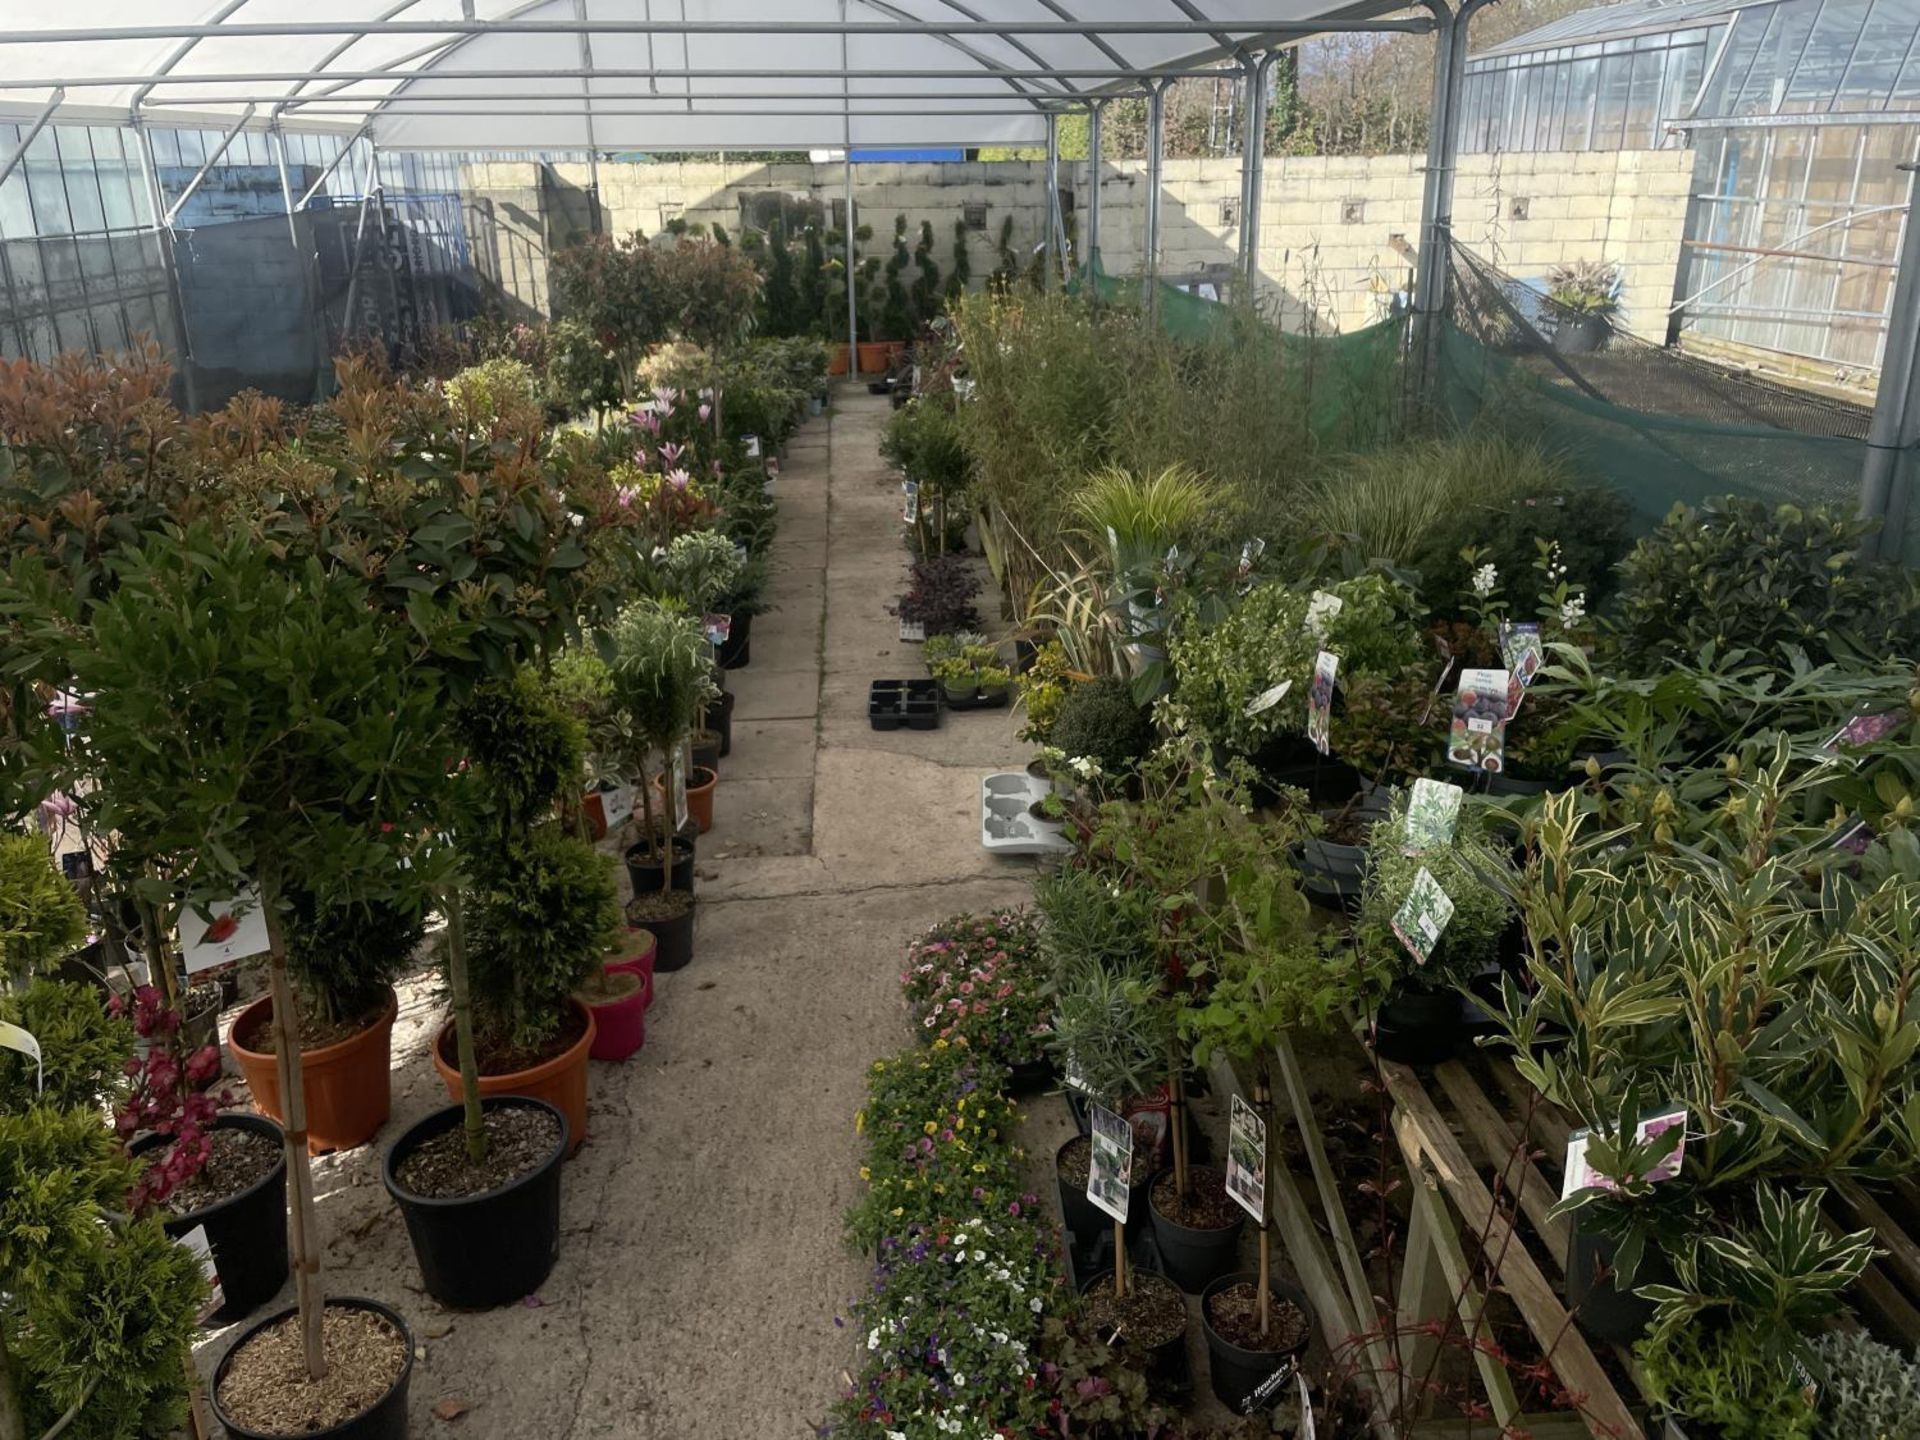 WELCOME TO ASHLEY WALLER HORTICULTURE AUCTION - LOTS ARE BEING ADDED DAILY - THE IMAGES SHOW LOTS - Image 9 of 40